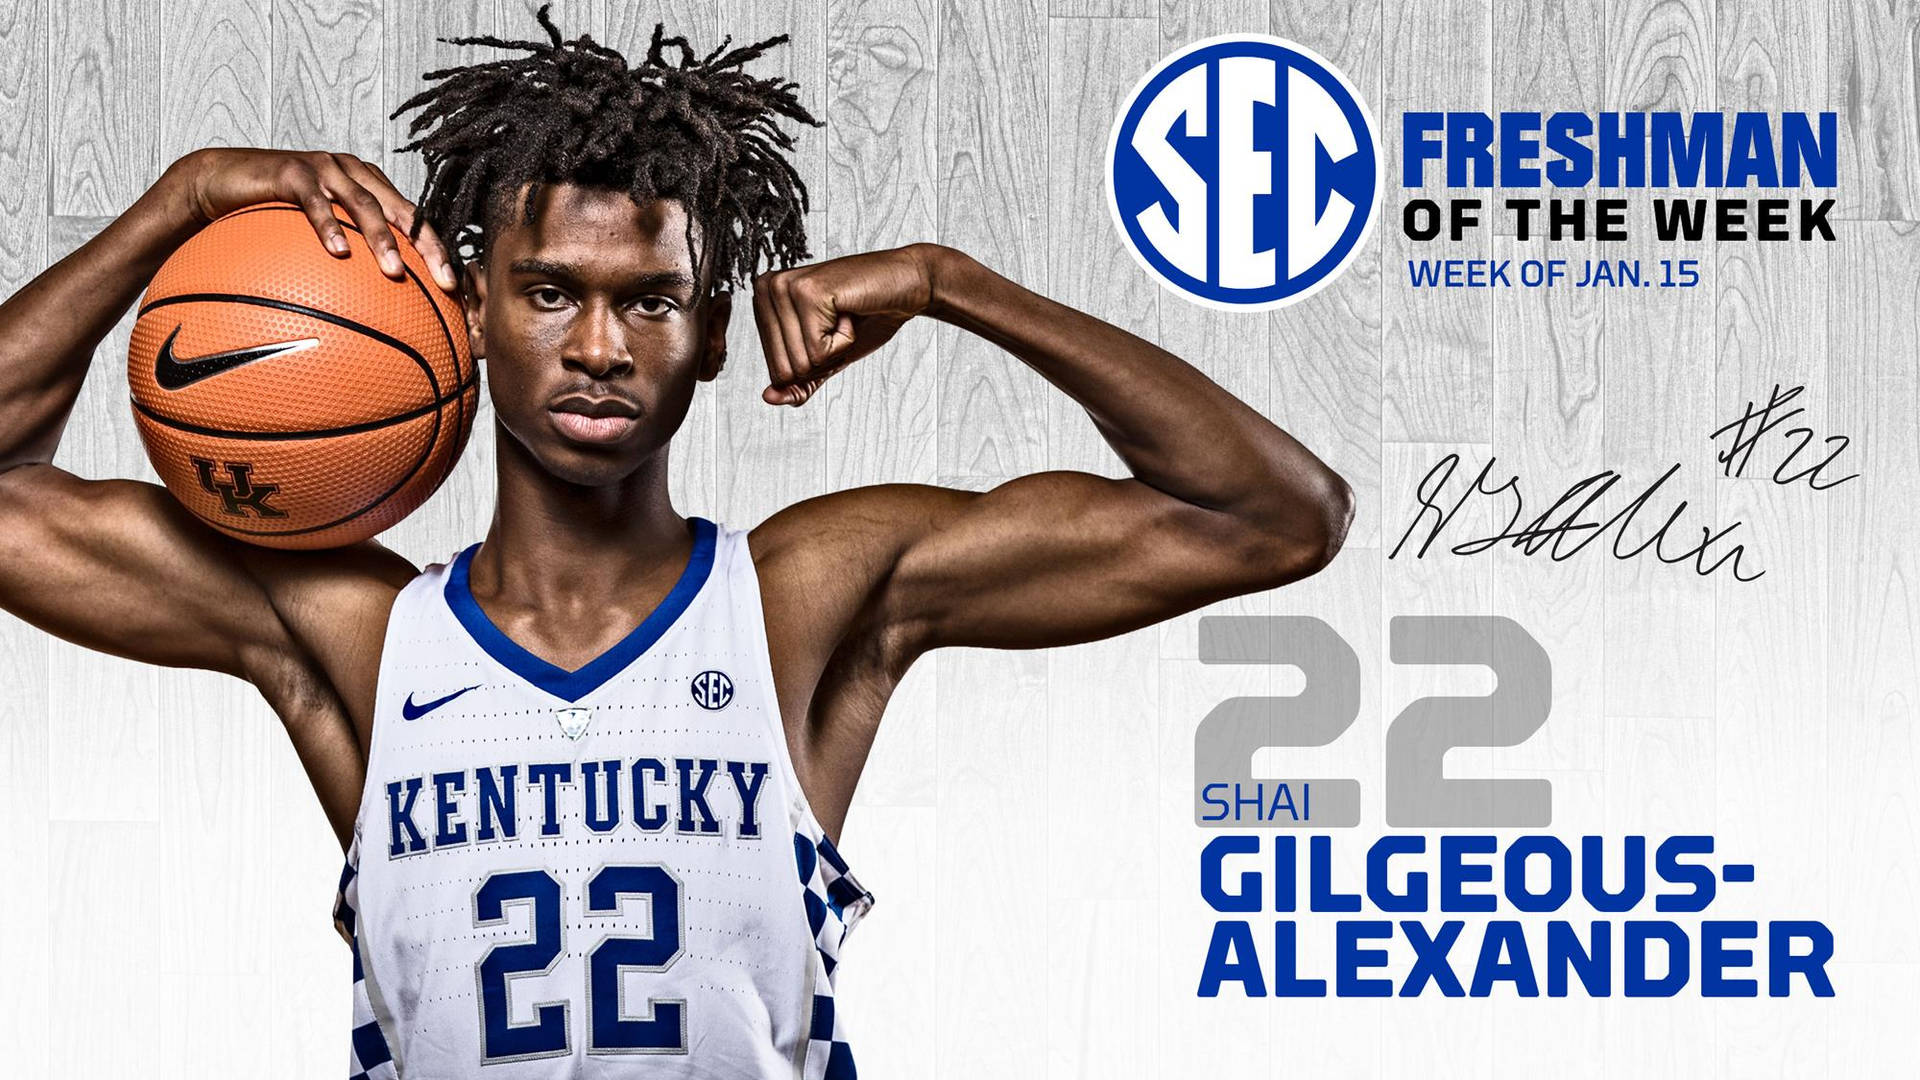 Cover Story – PAUSE Meets: Shai Gilgeous-Alexander – PAUSE Online